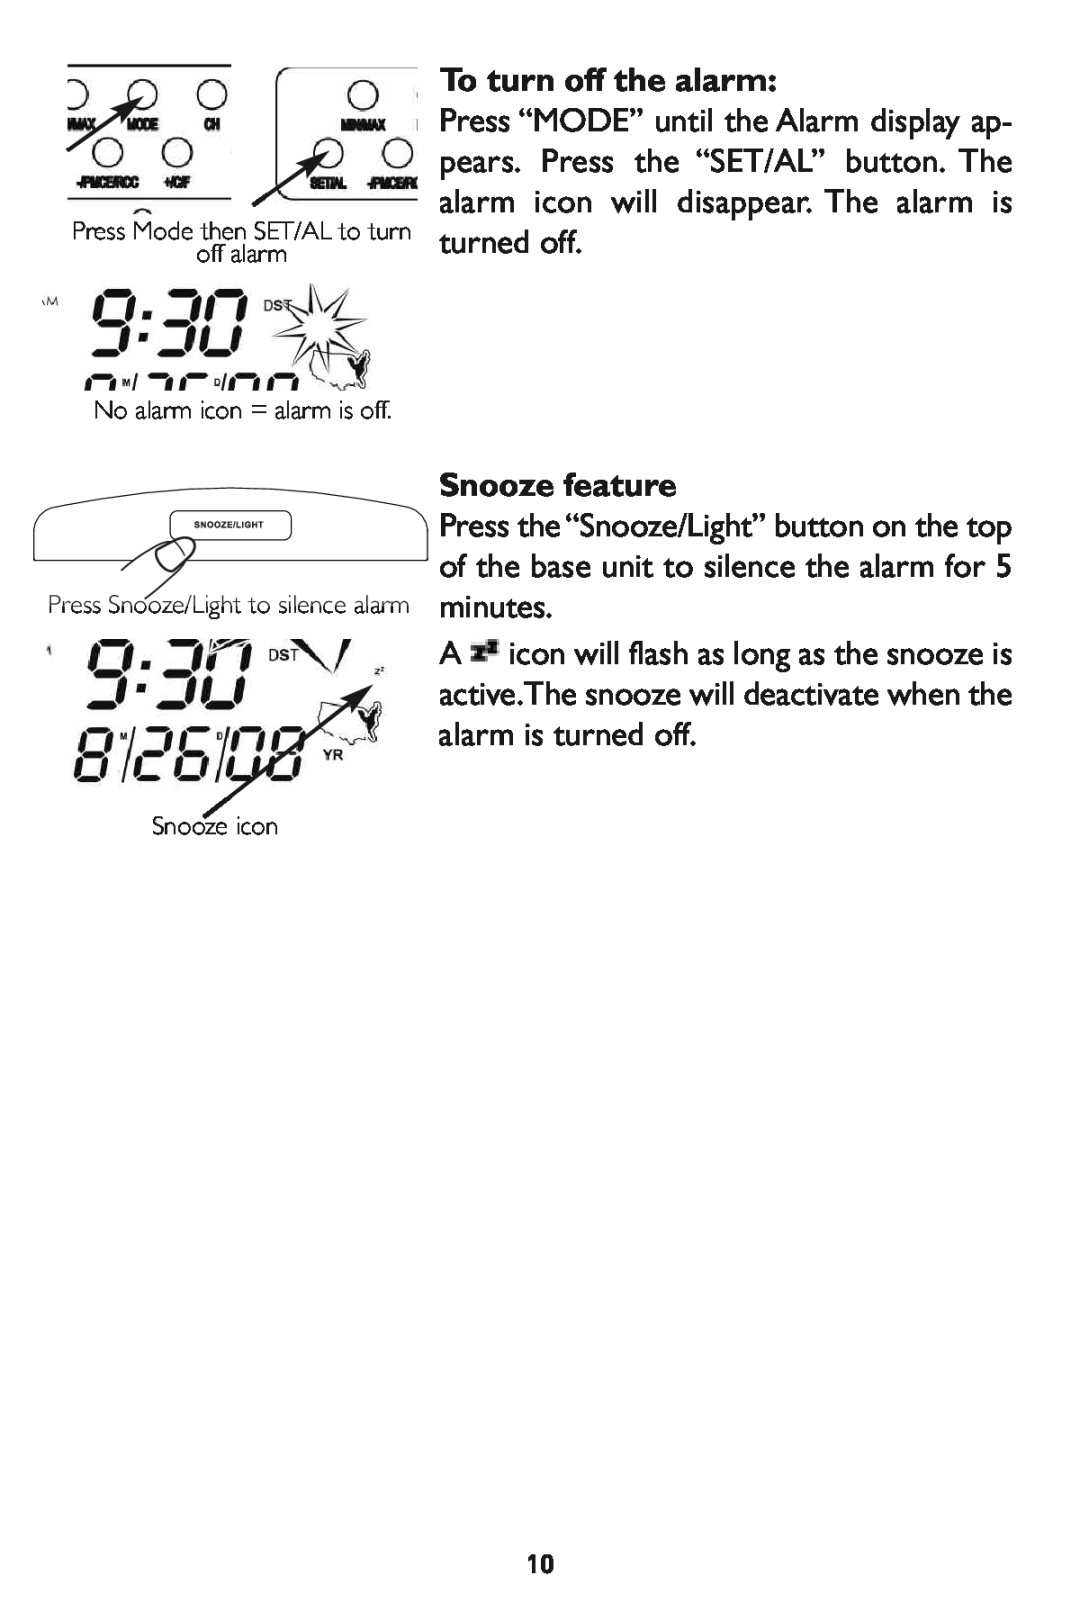 Taylor 1526 instruction manual Toturn off the alarm, Snooze feature, off alarm No alarm icon = alarm is off, Snooze icon 